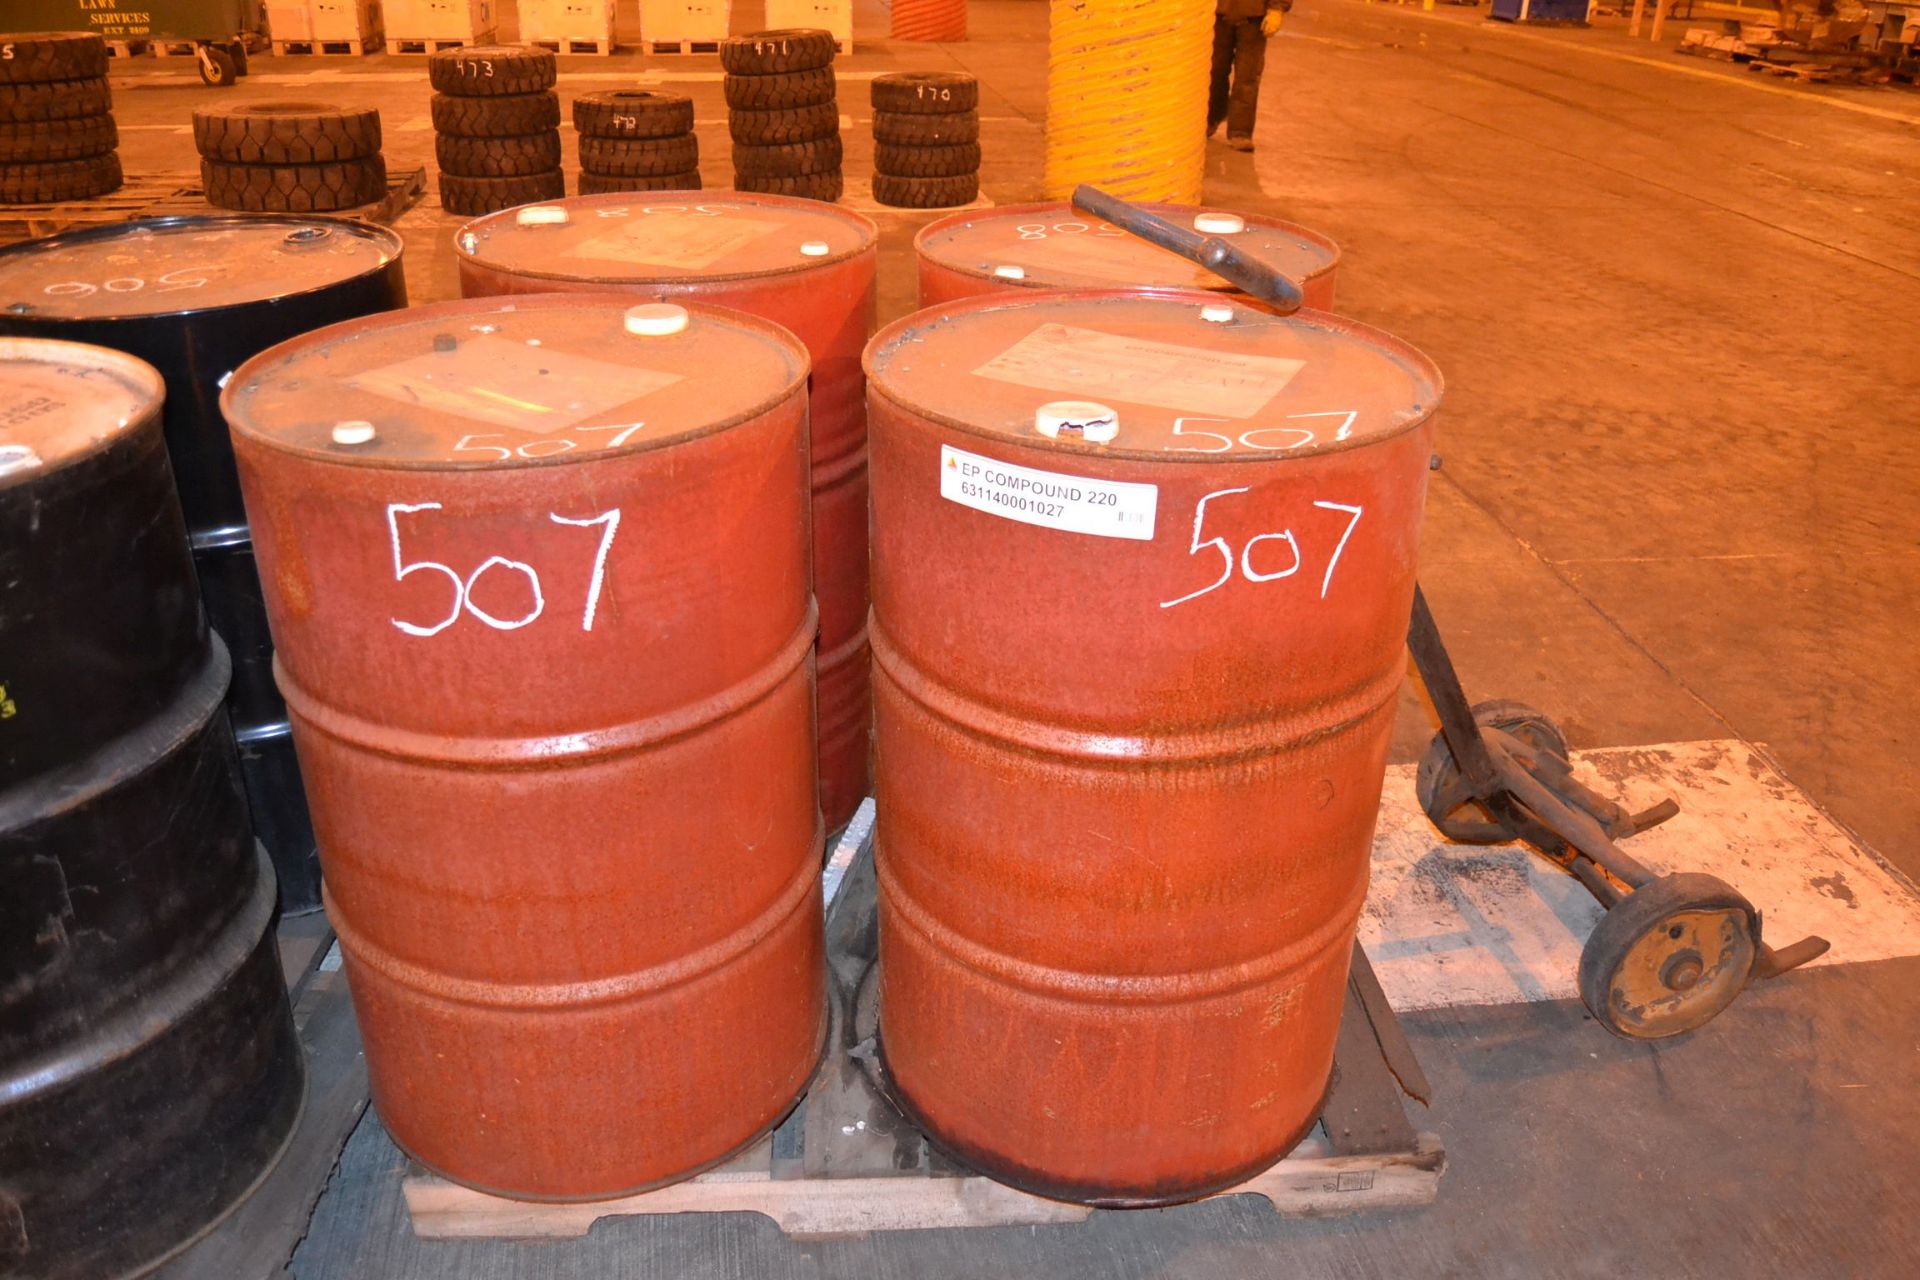 (2) 55 GAL DRUMS OF EP COMPOUND 220 GEAR LUBE